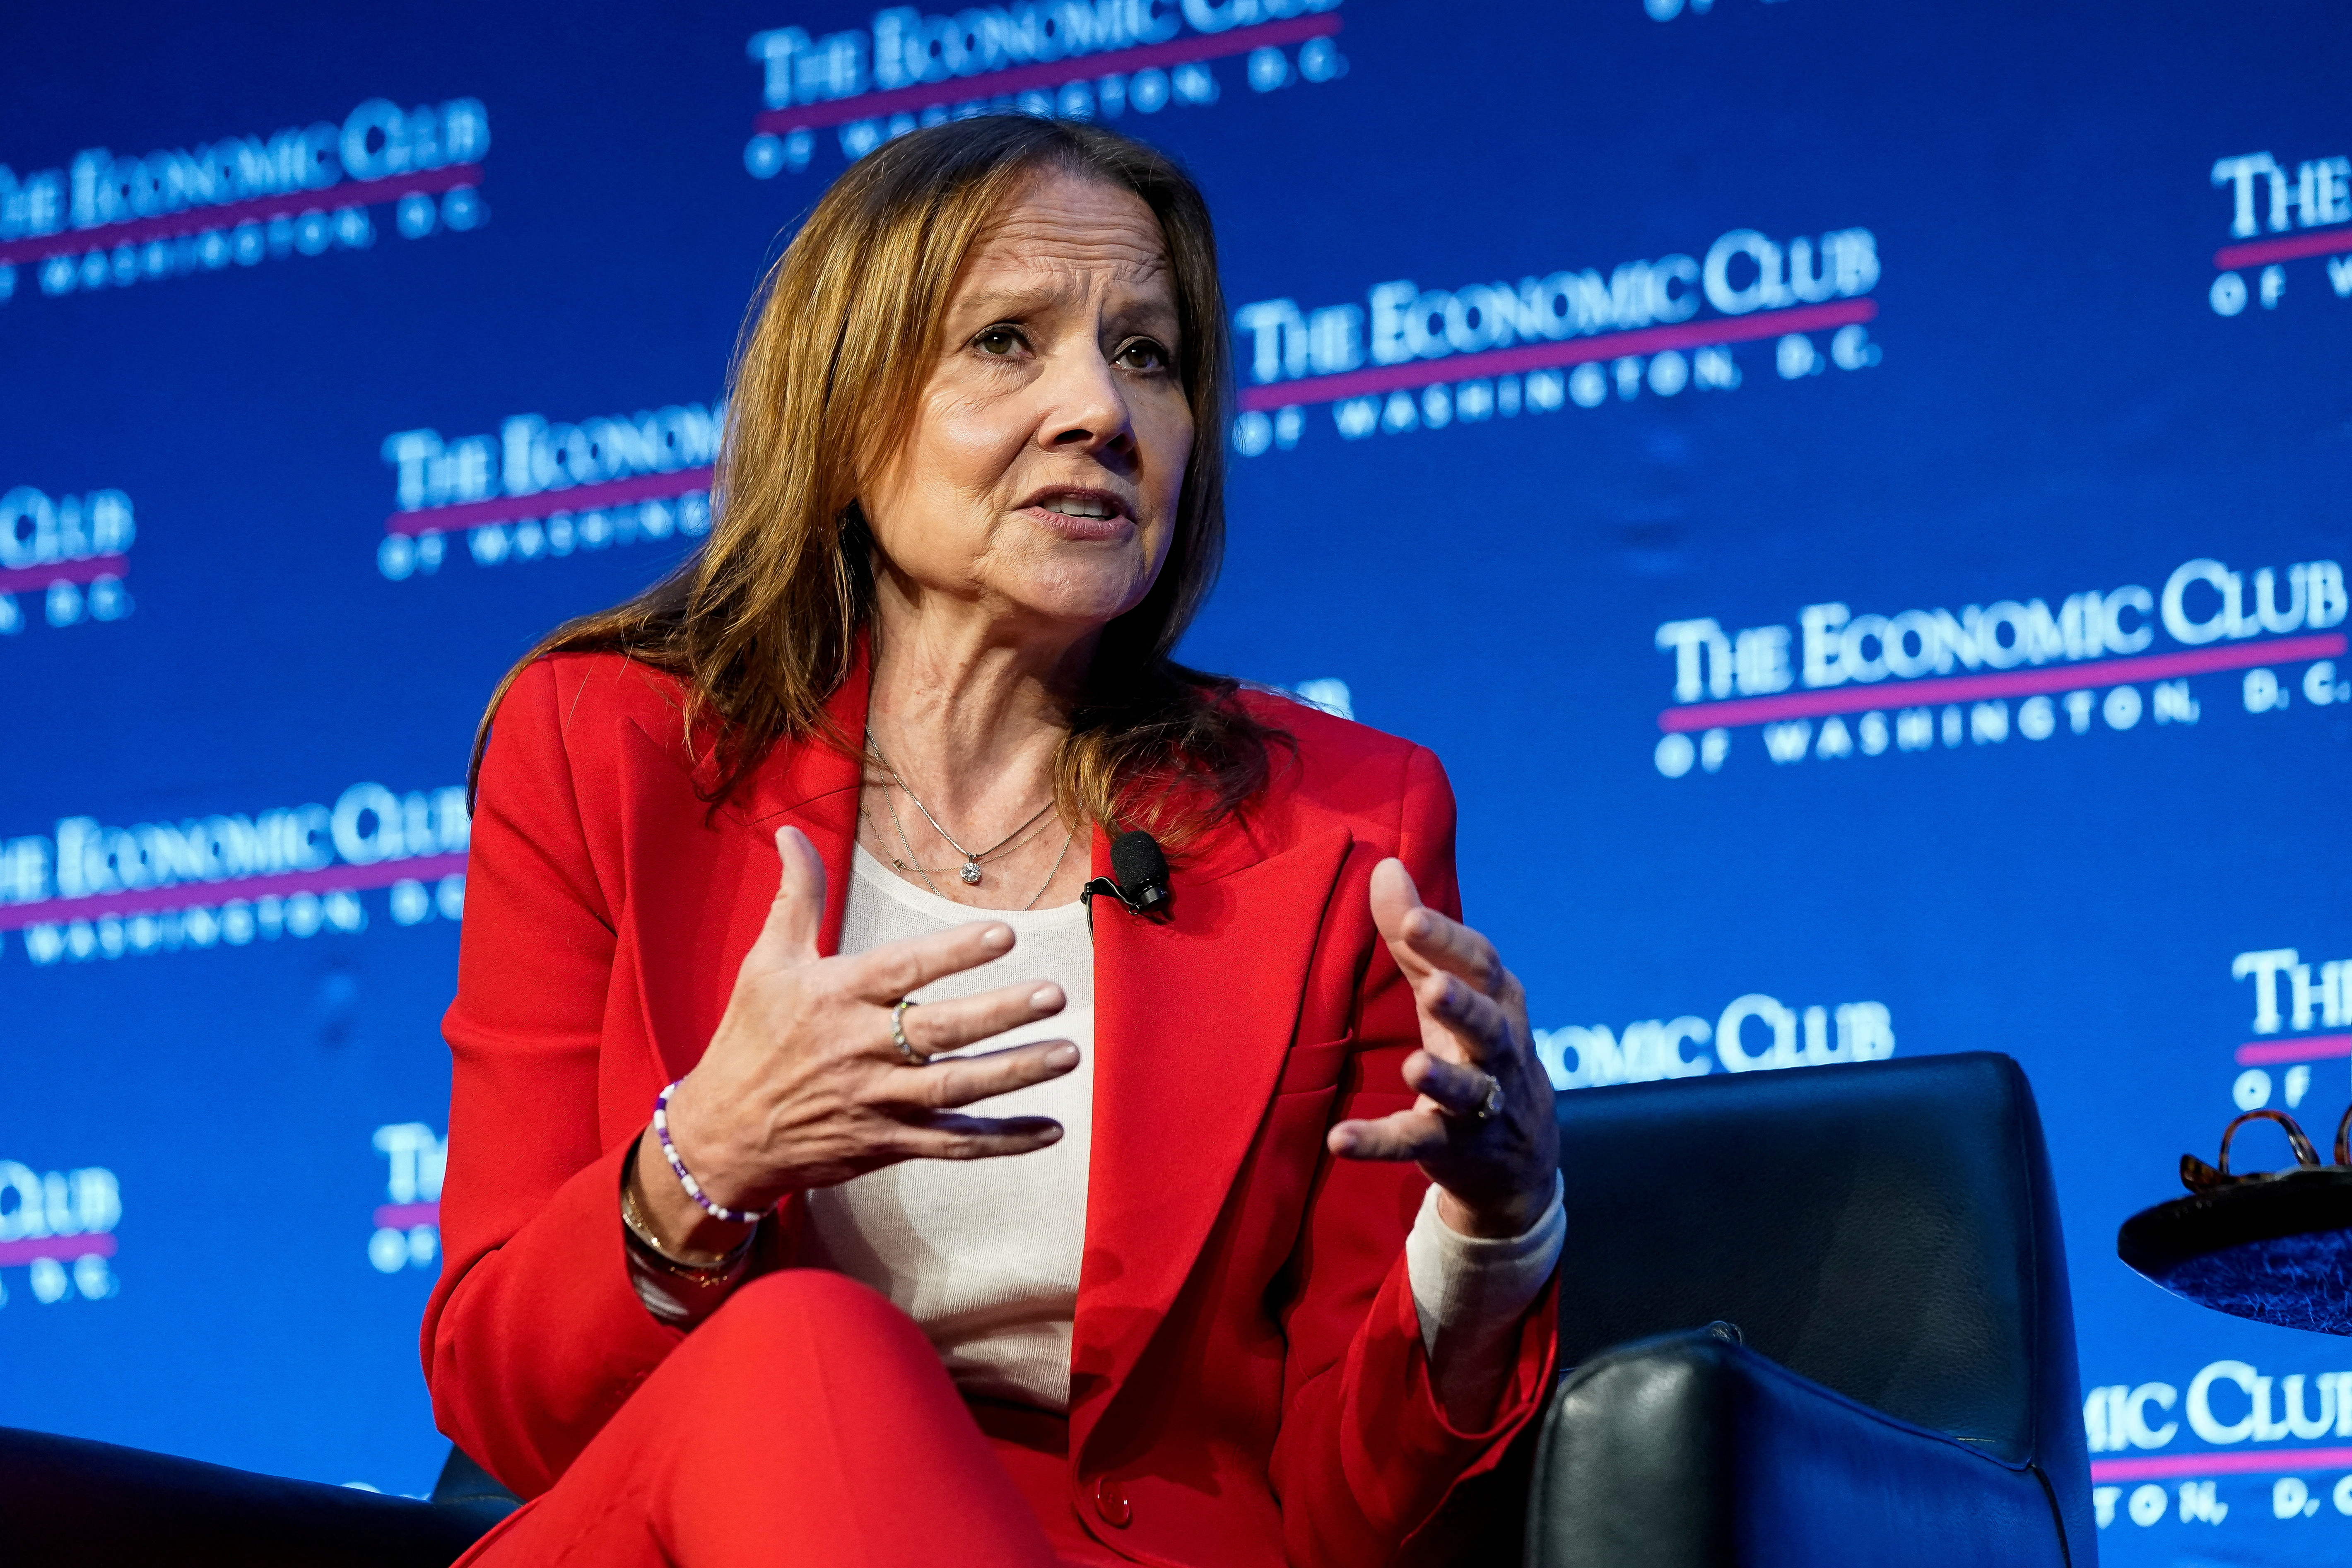 General Motors chair and CEO Mary Barra participates in an Economic Club of Washington discussion in Washington